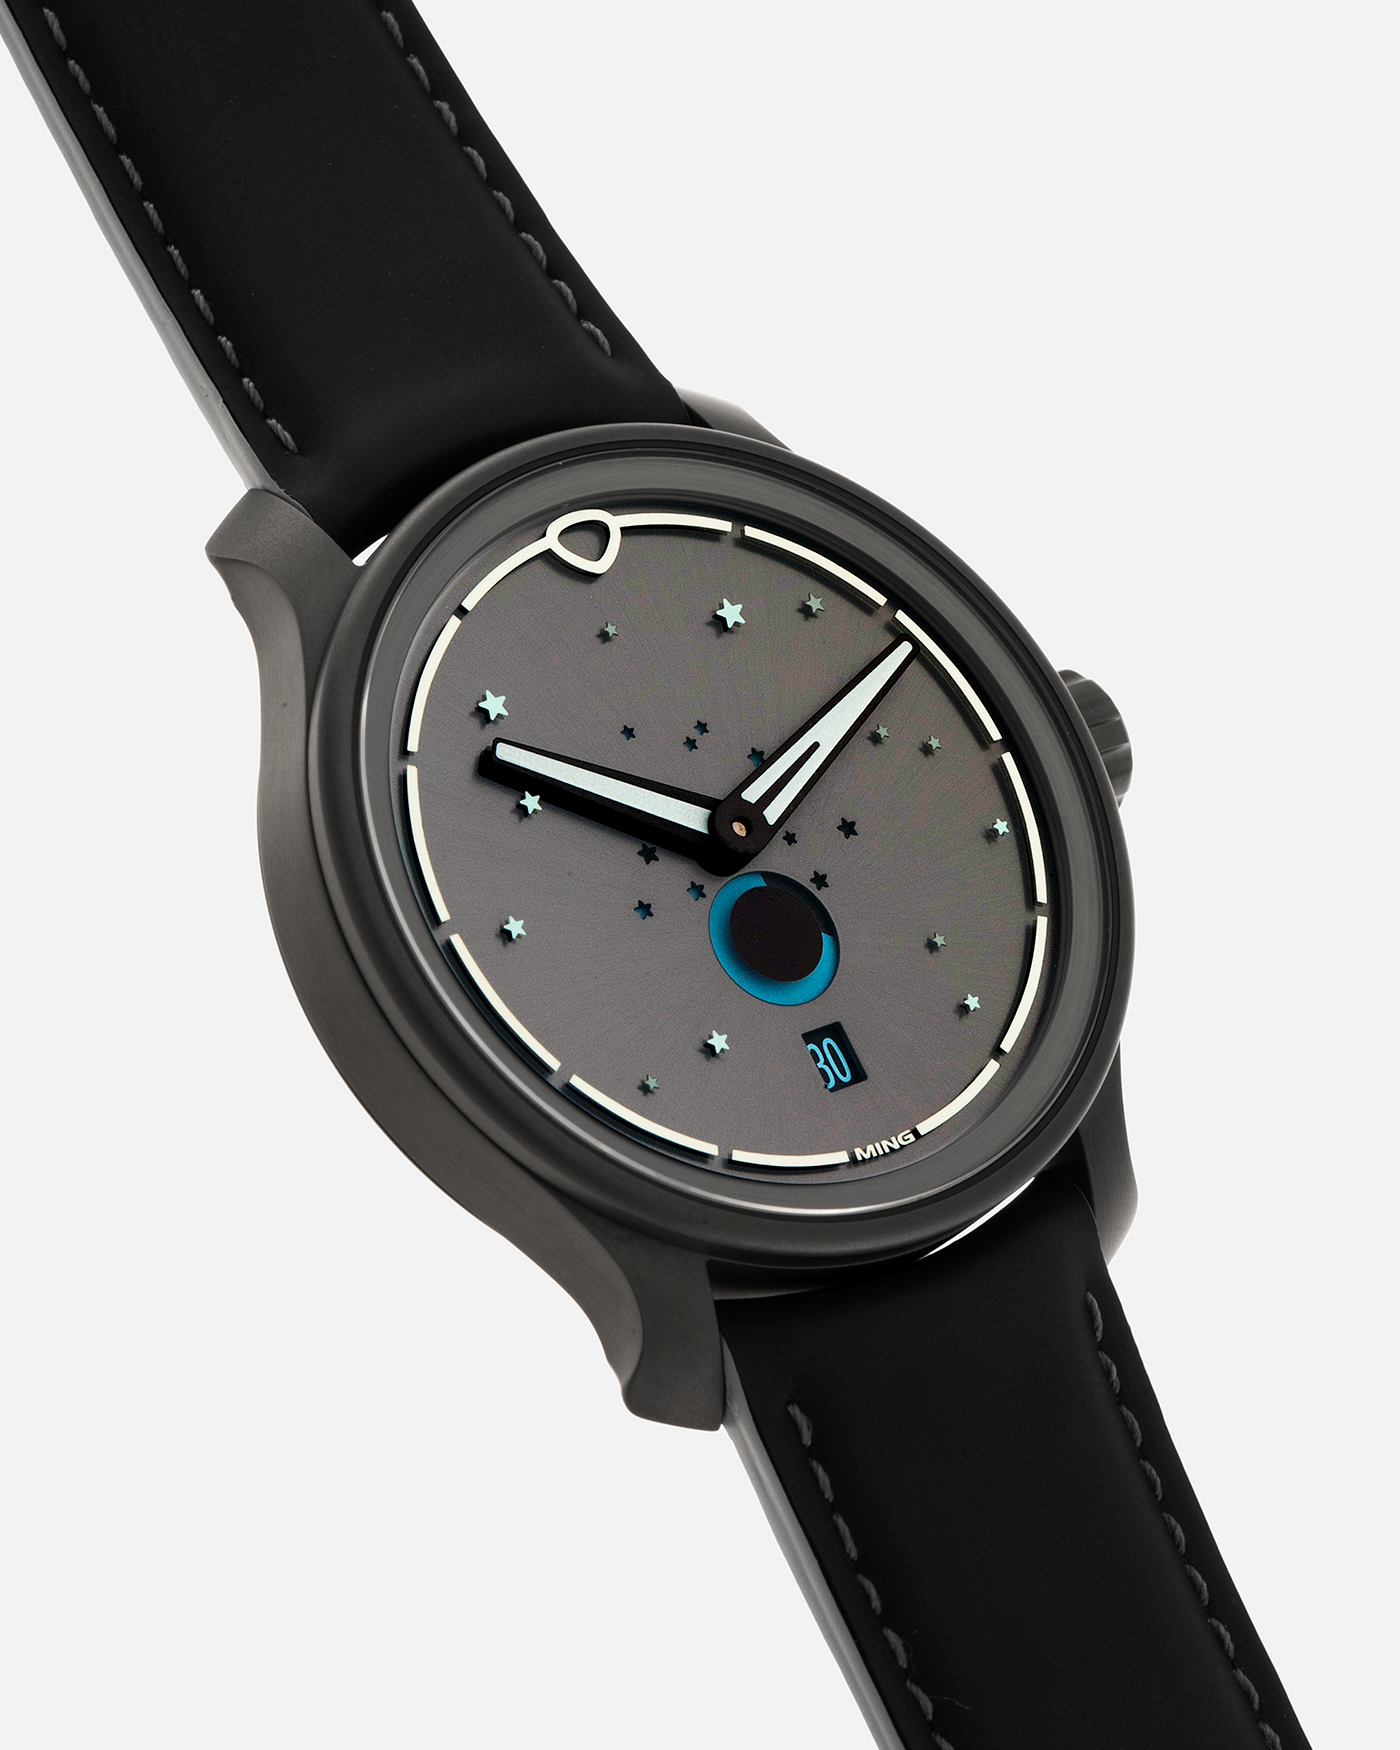 Brand: MING Year: 2023 Model: 37.05 Moonphase Series 2 Special Edition (Special Caves Project), Limited to 50 pieces Material: DLC-Coated Stainless Steel Movement: Heavily Modified Sellita Cal. SW288-1, Manual-Winding Case Diameter: 38mm Lug Width: 20mm Strap: Jean Rousseau Black Rubber with Blue Under Lining for MING with Signed DLC-Coated Keeperless Flying Blade Buckle